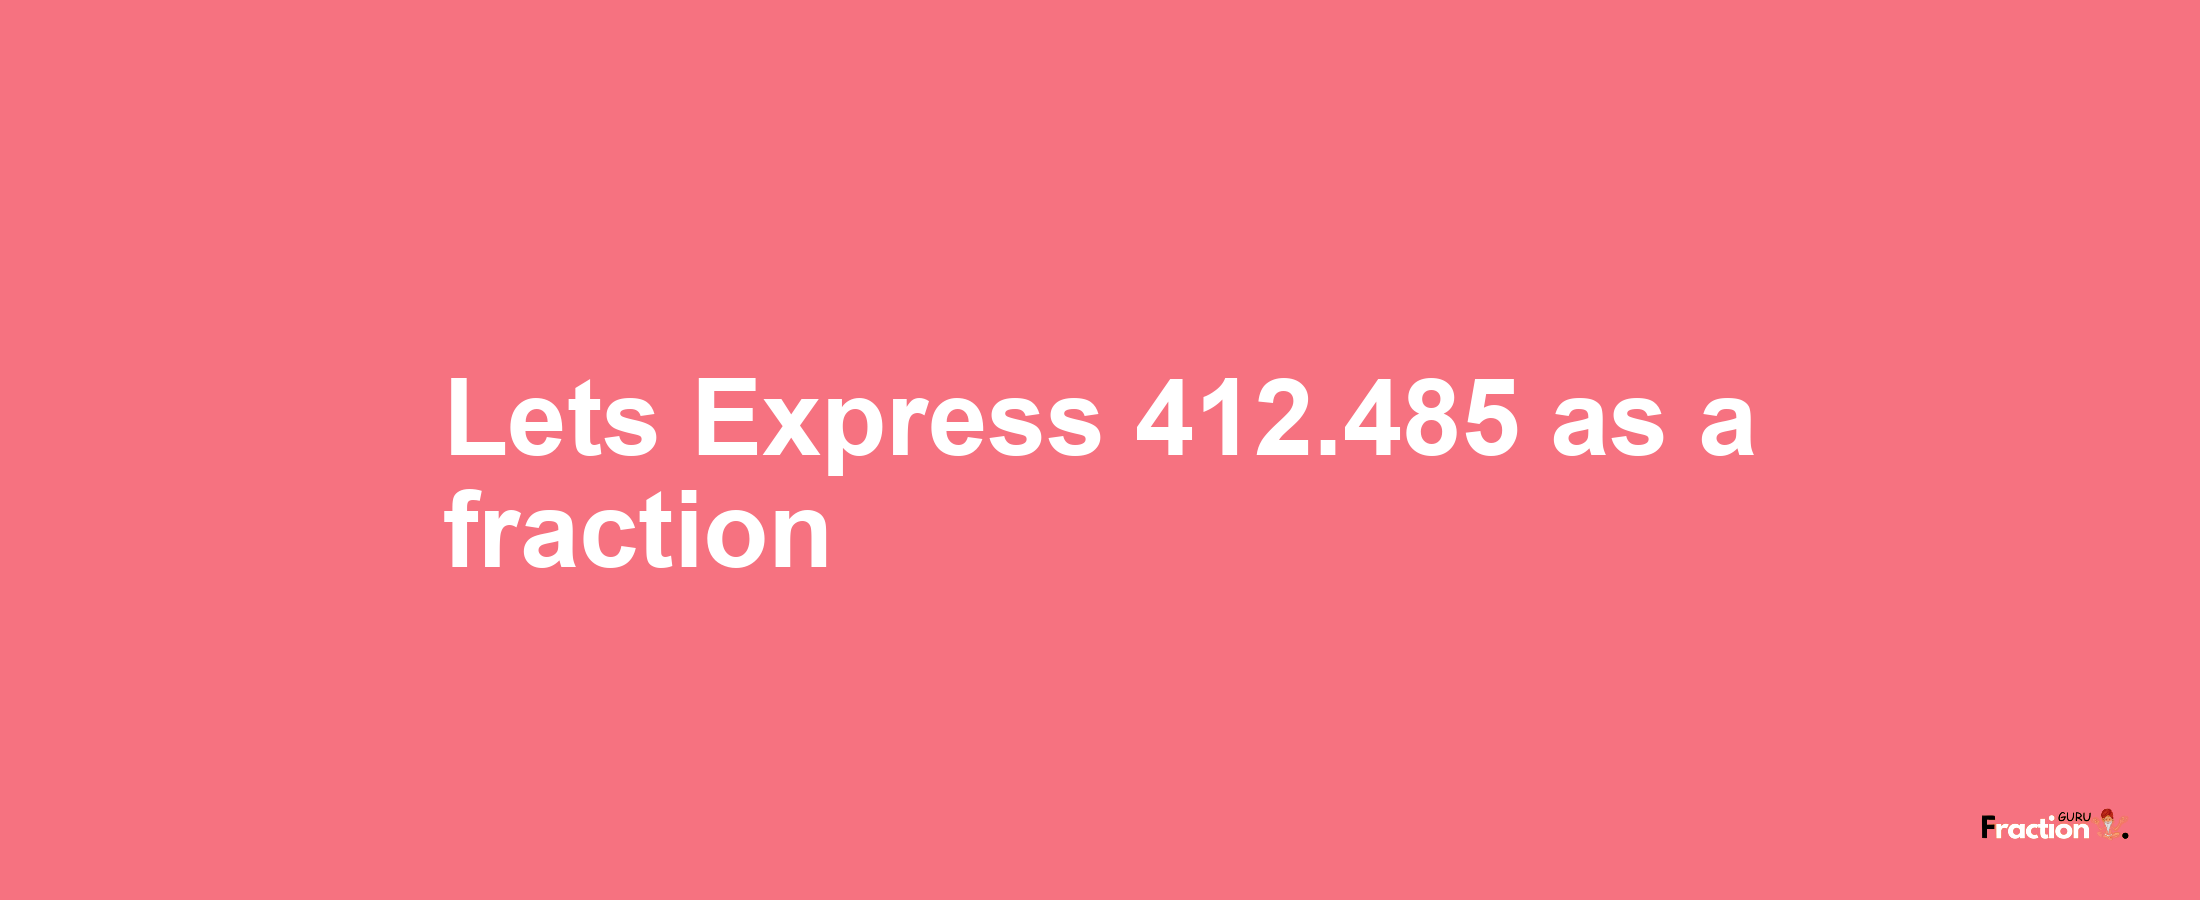 Lets Express 412.485 as afraction